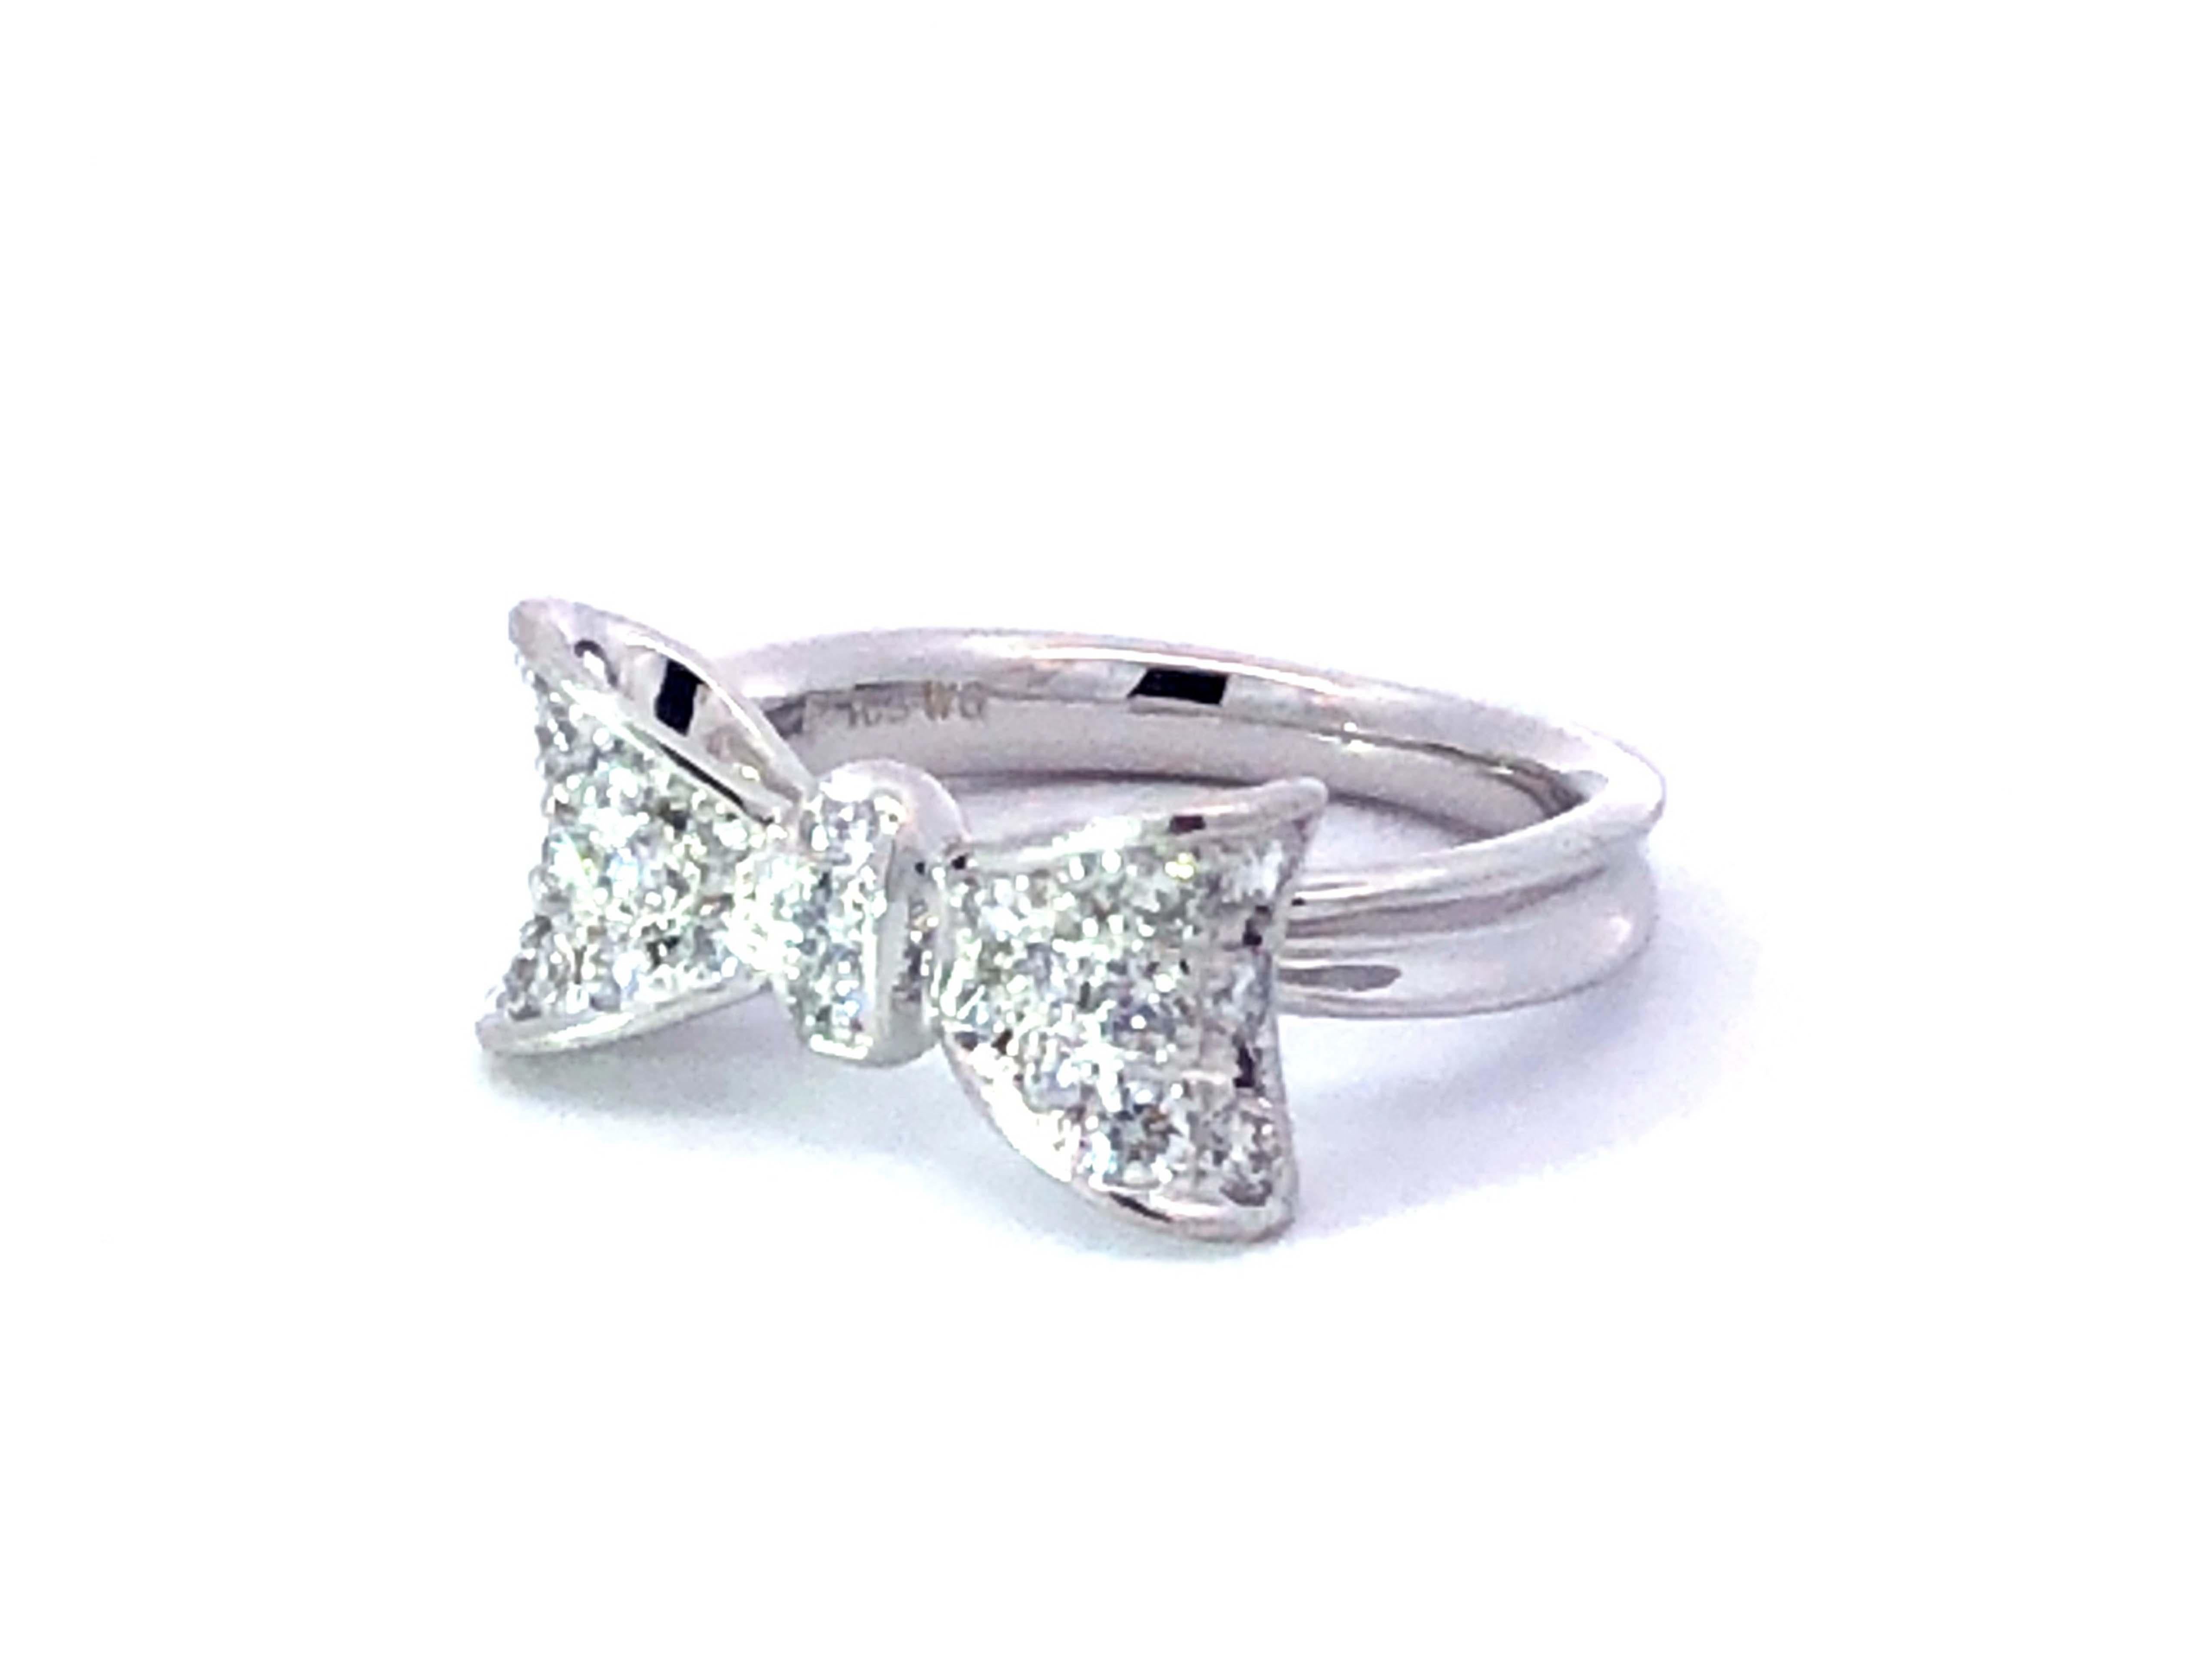 Diamond Bowtie Ring in 18k White Gold In Excellent Condition For Sale In Honolulu, HI